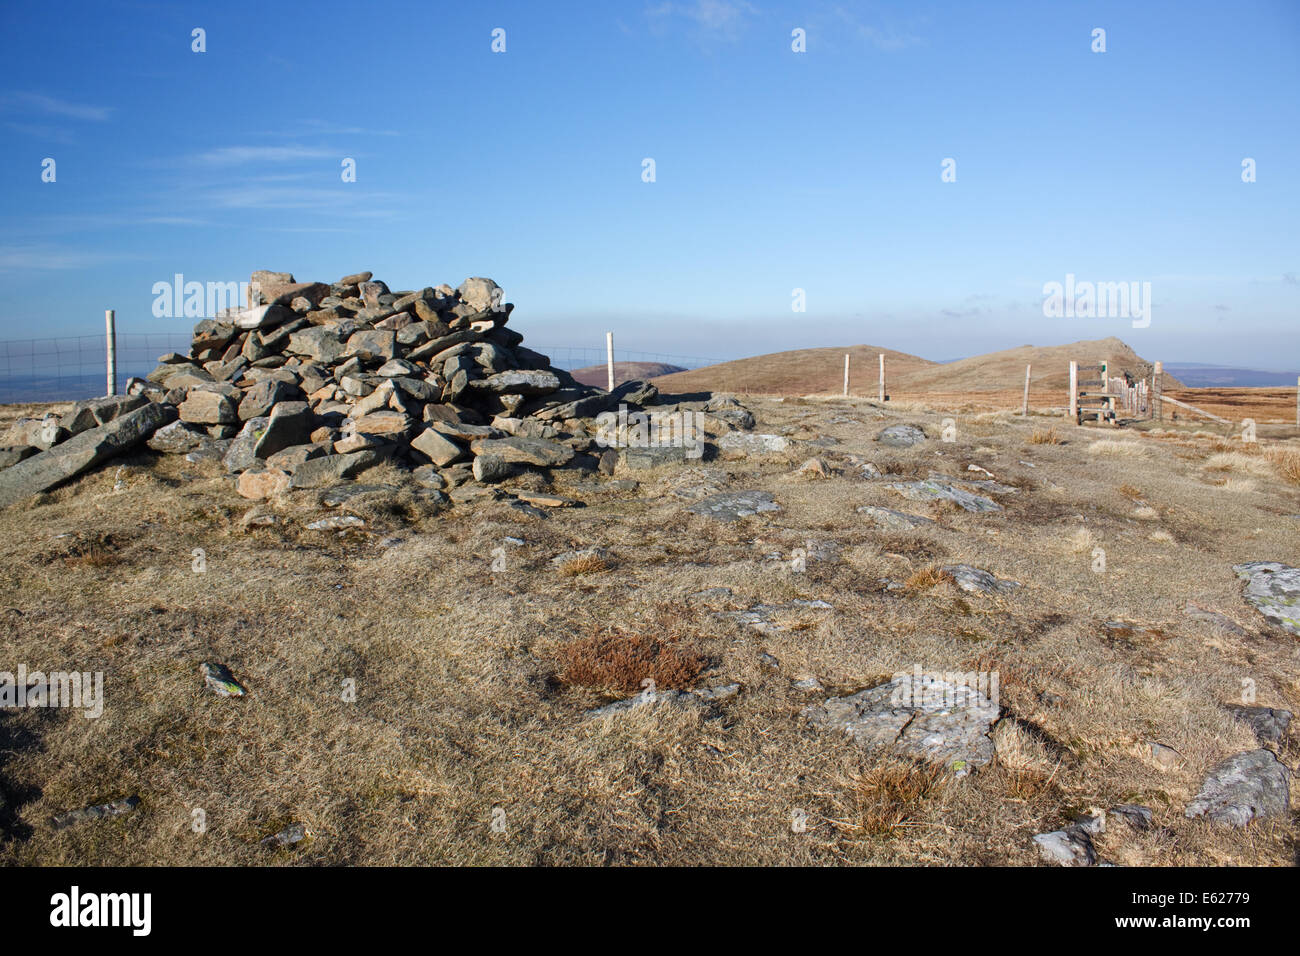 The summit cairn on Moel Sych, a mountain in the Berwyn hills of North Wales. Stock Photo